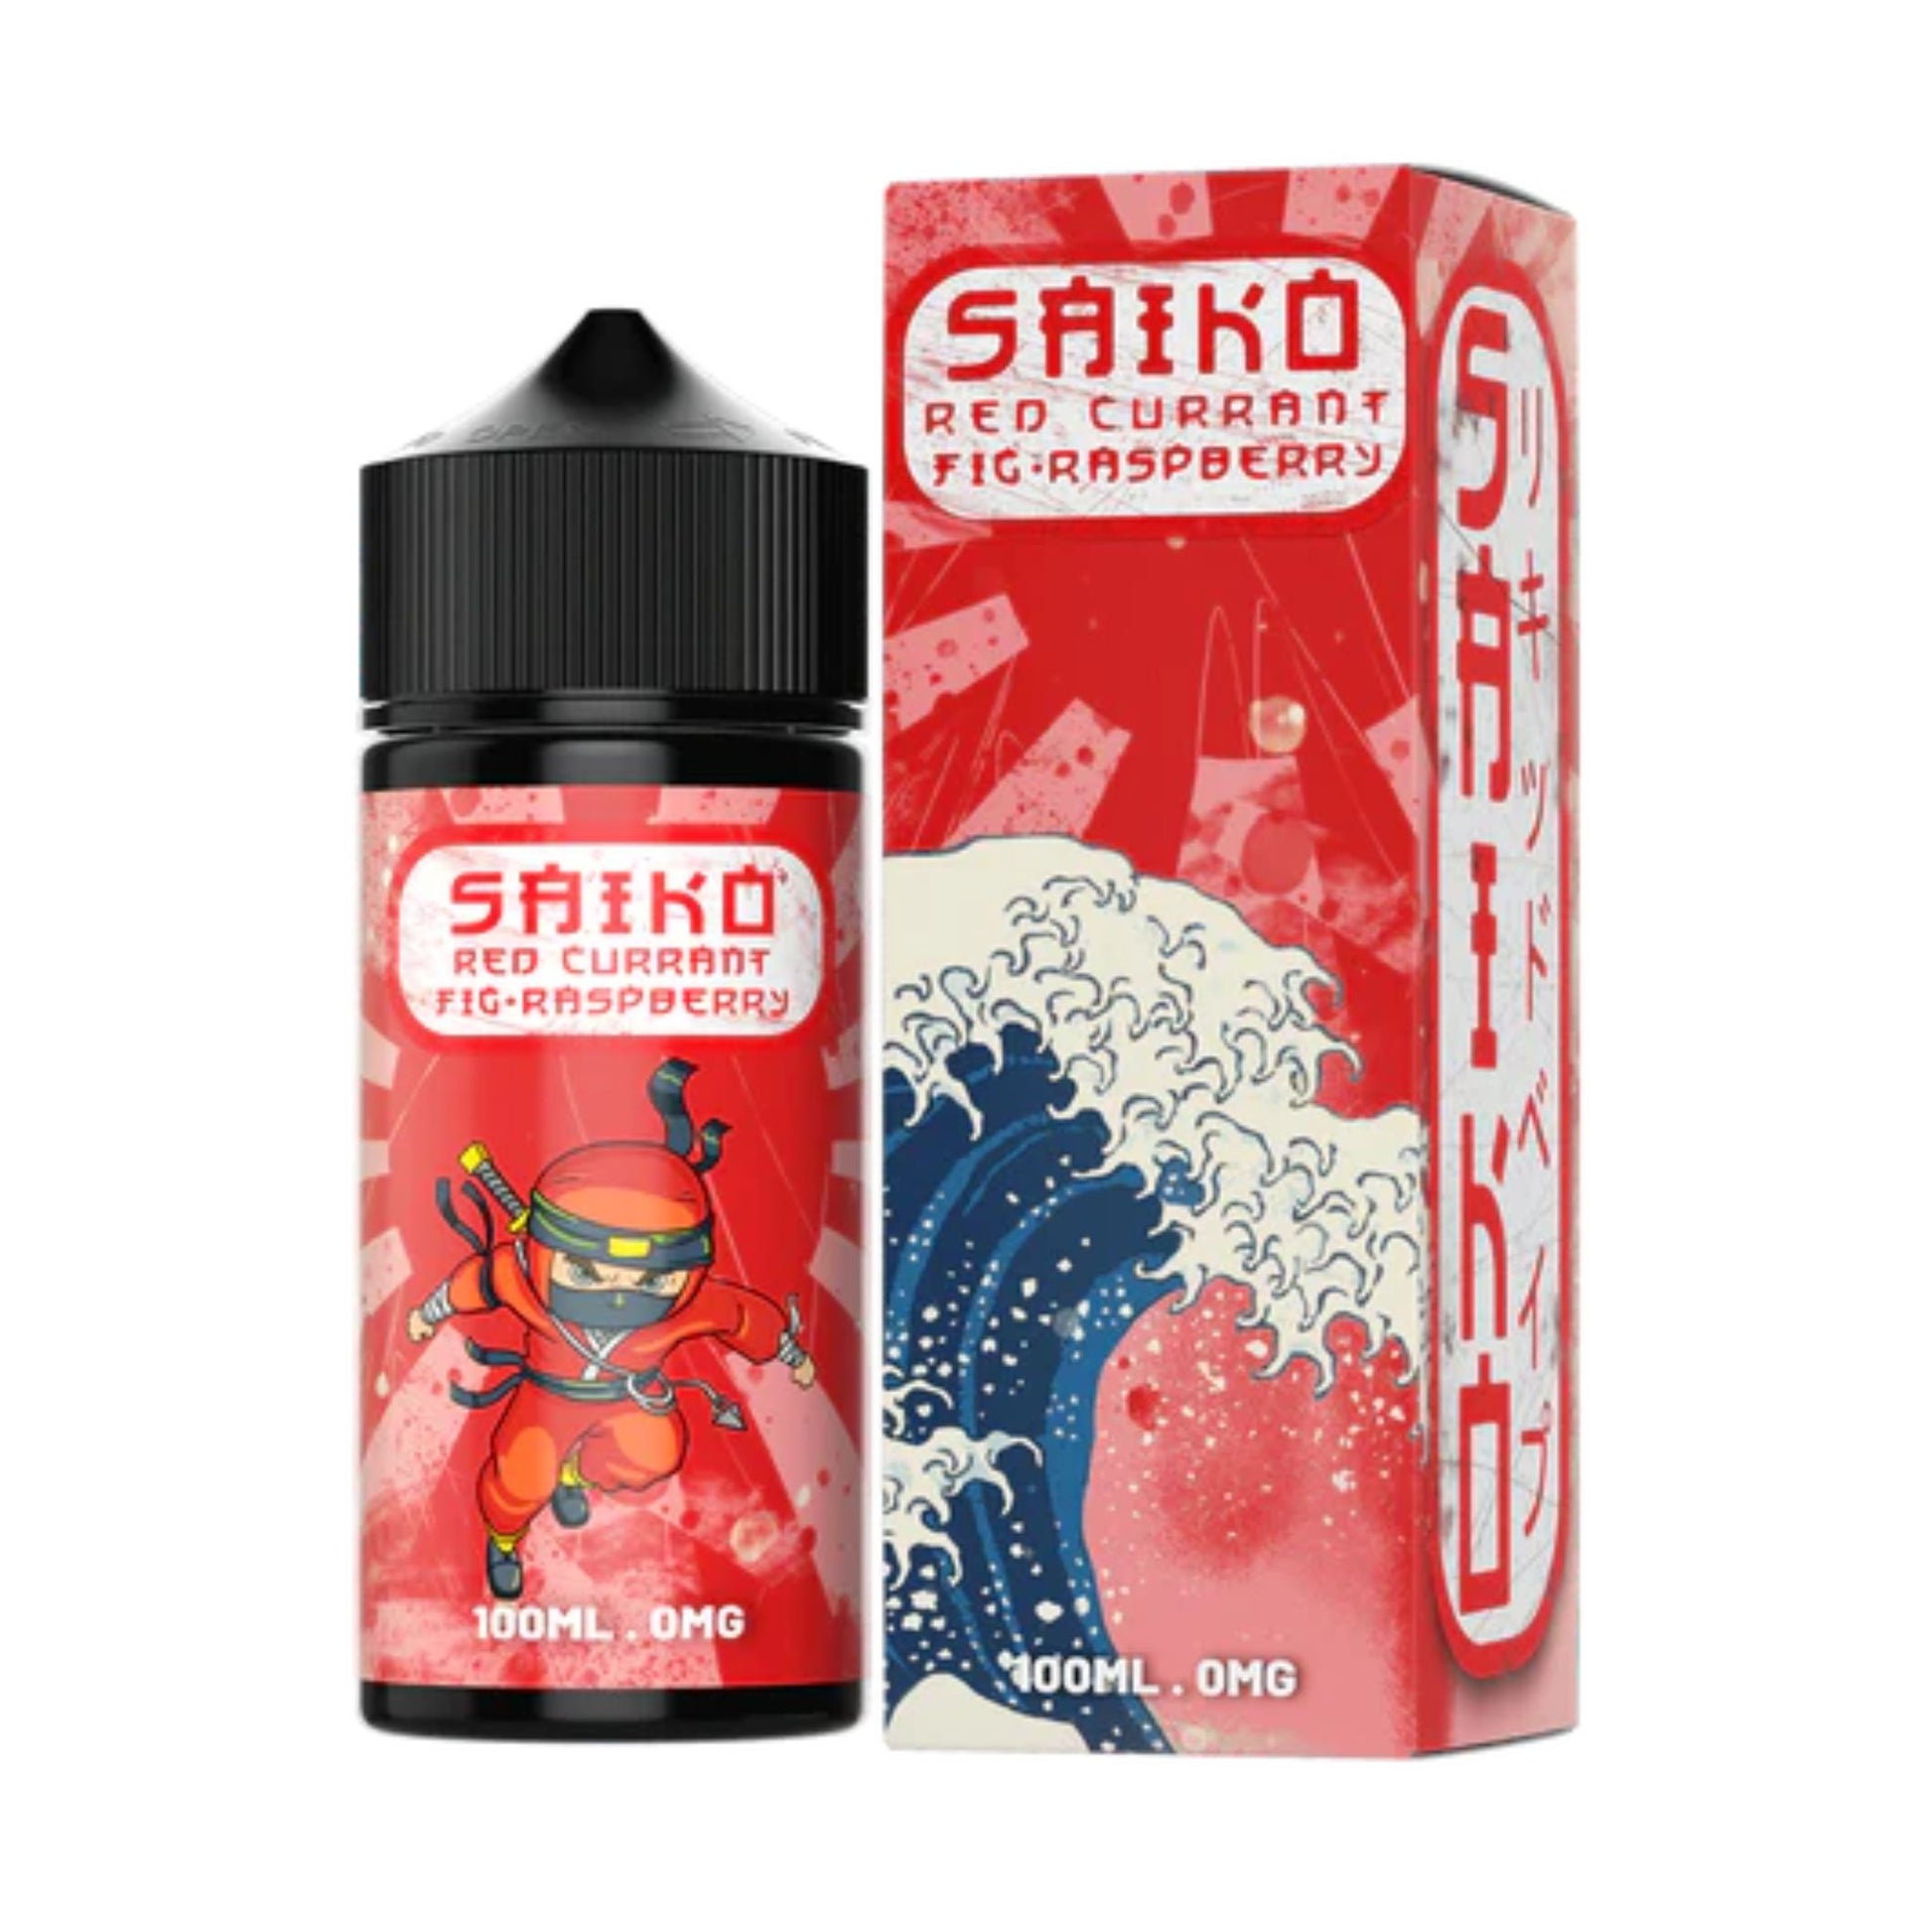 Saiko | Red Currant Fig Raspberry | 100ml bottle and box